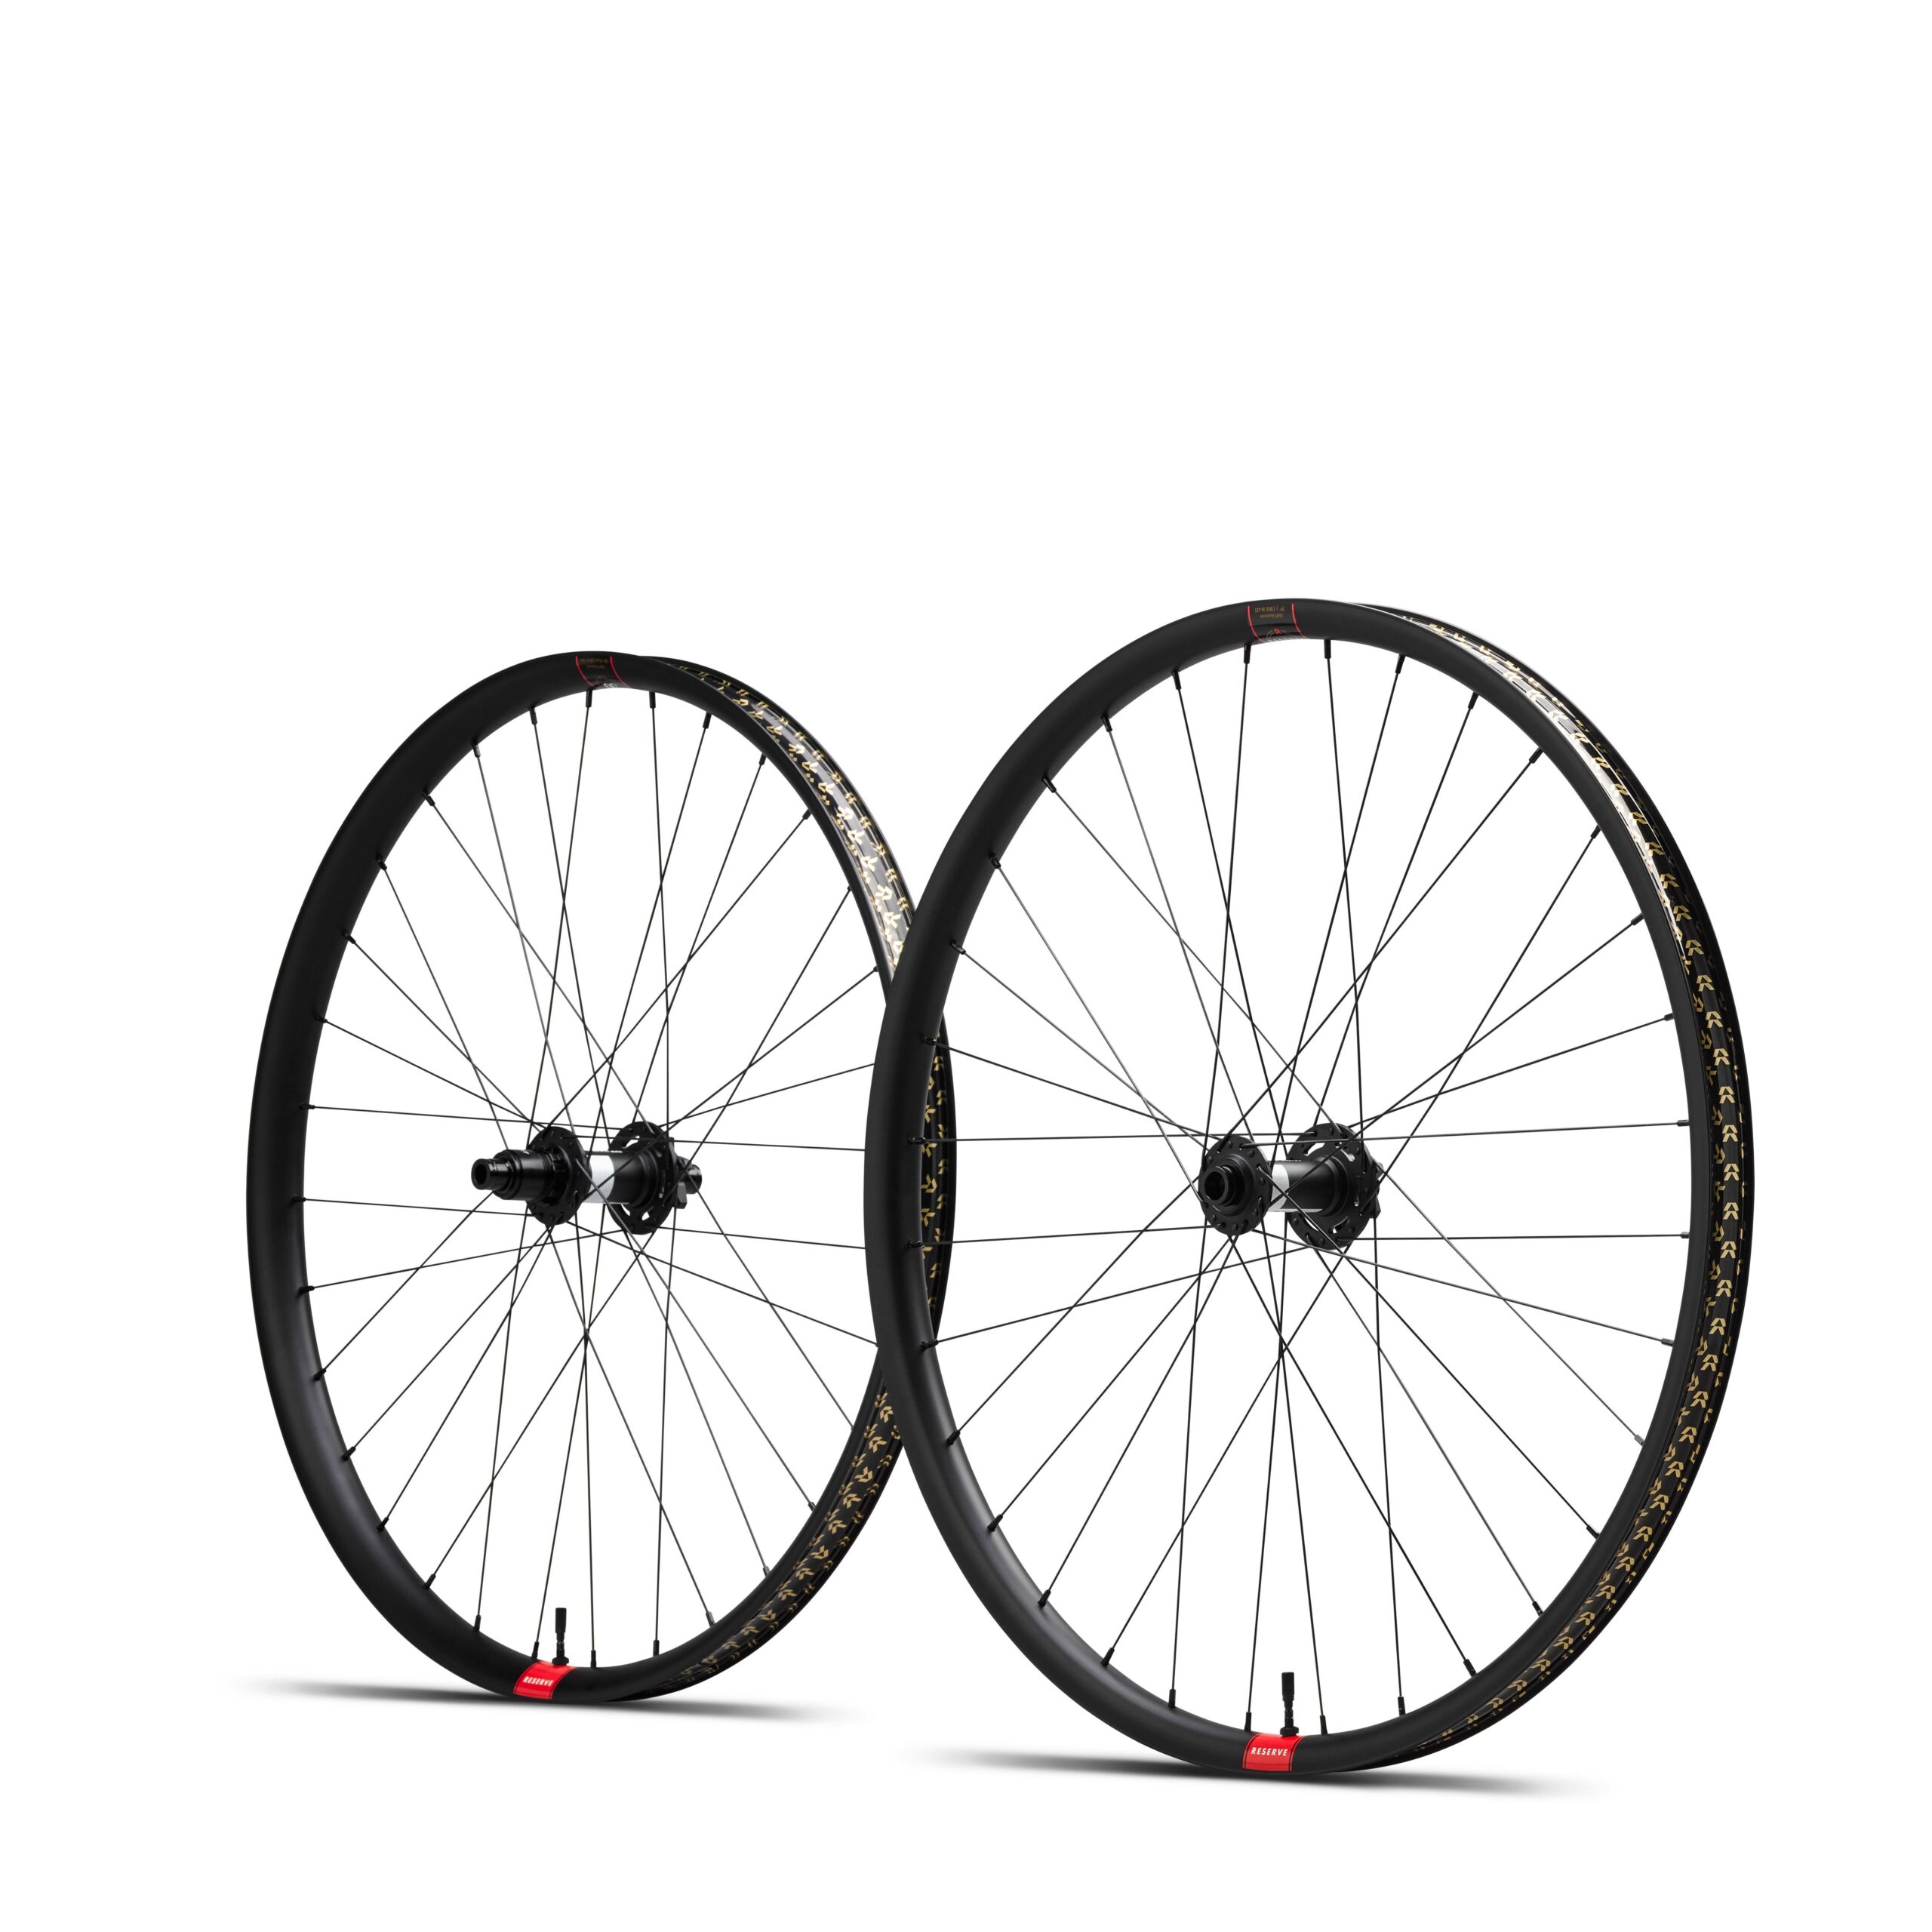 David Golay reviews the Reserve Aluminum wheels for Blister